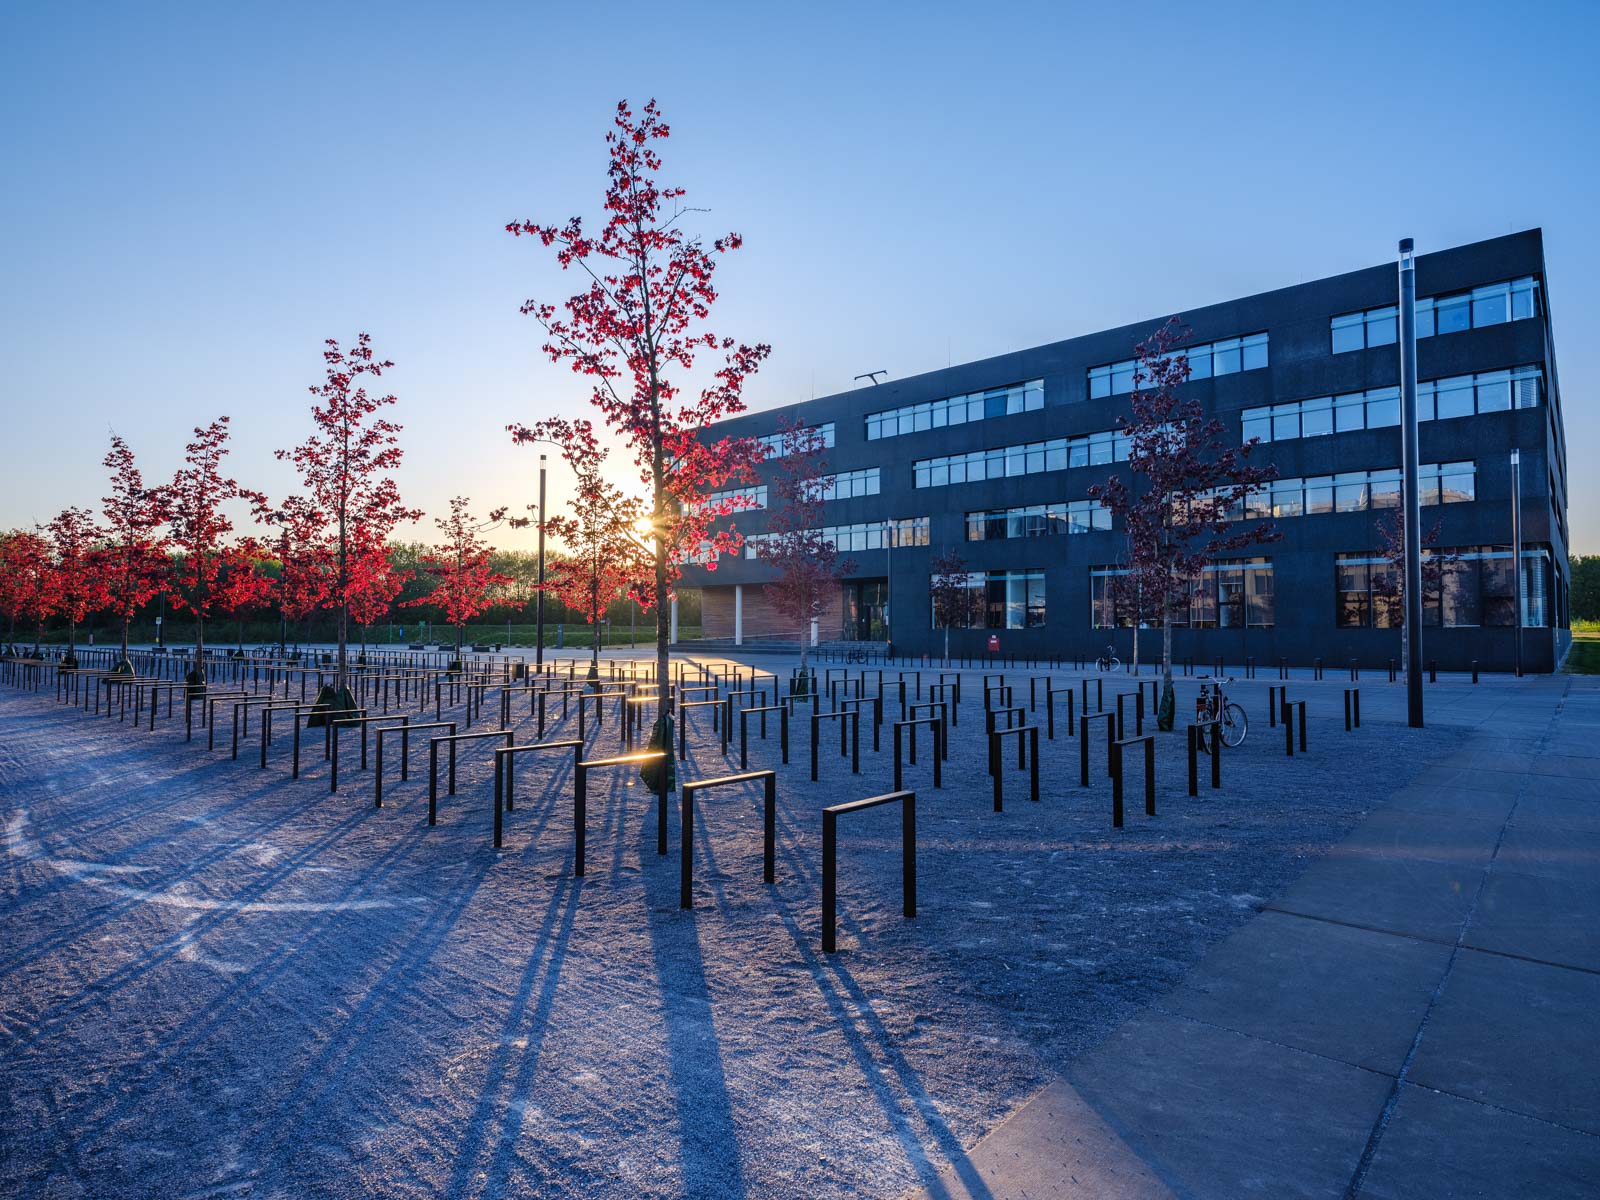 North Campus with CITEC at Bielefeld University in April 2020 (Germany).